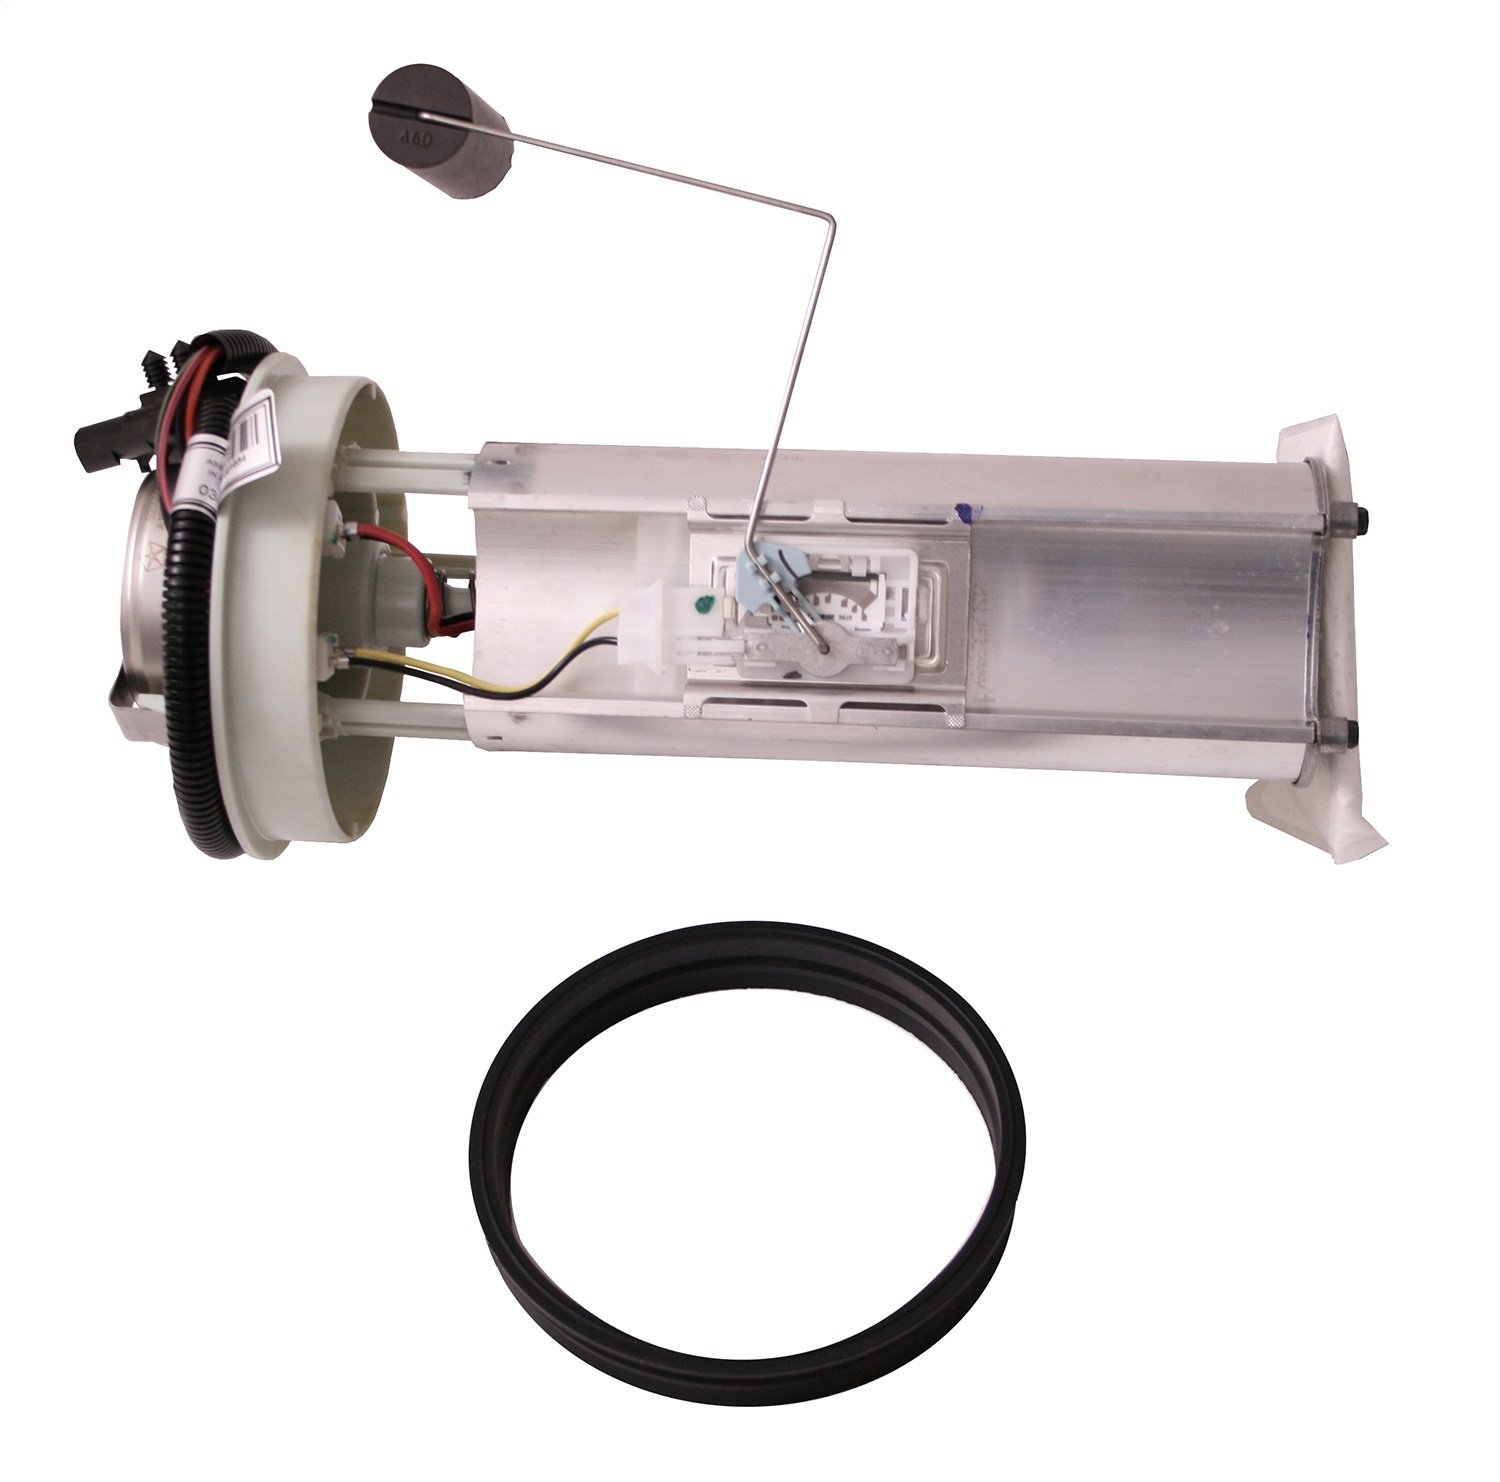 Replacement fuel pump module from Omix-ADA, Fits 97-01